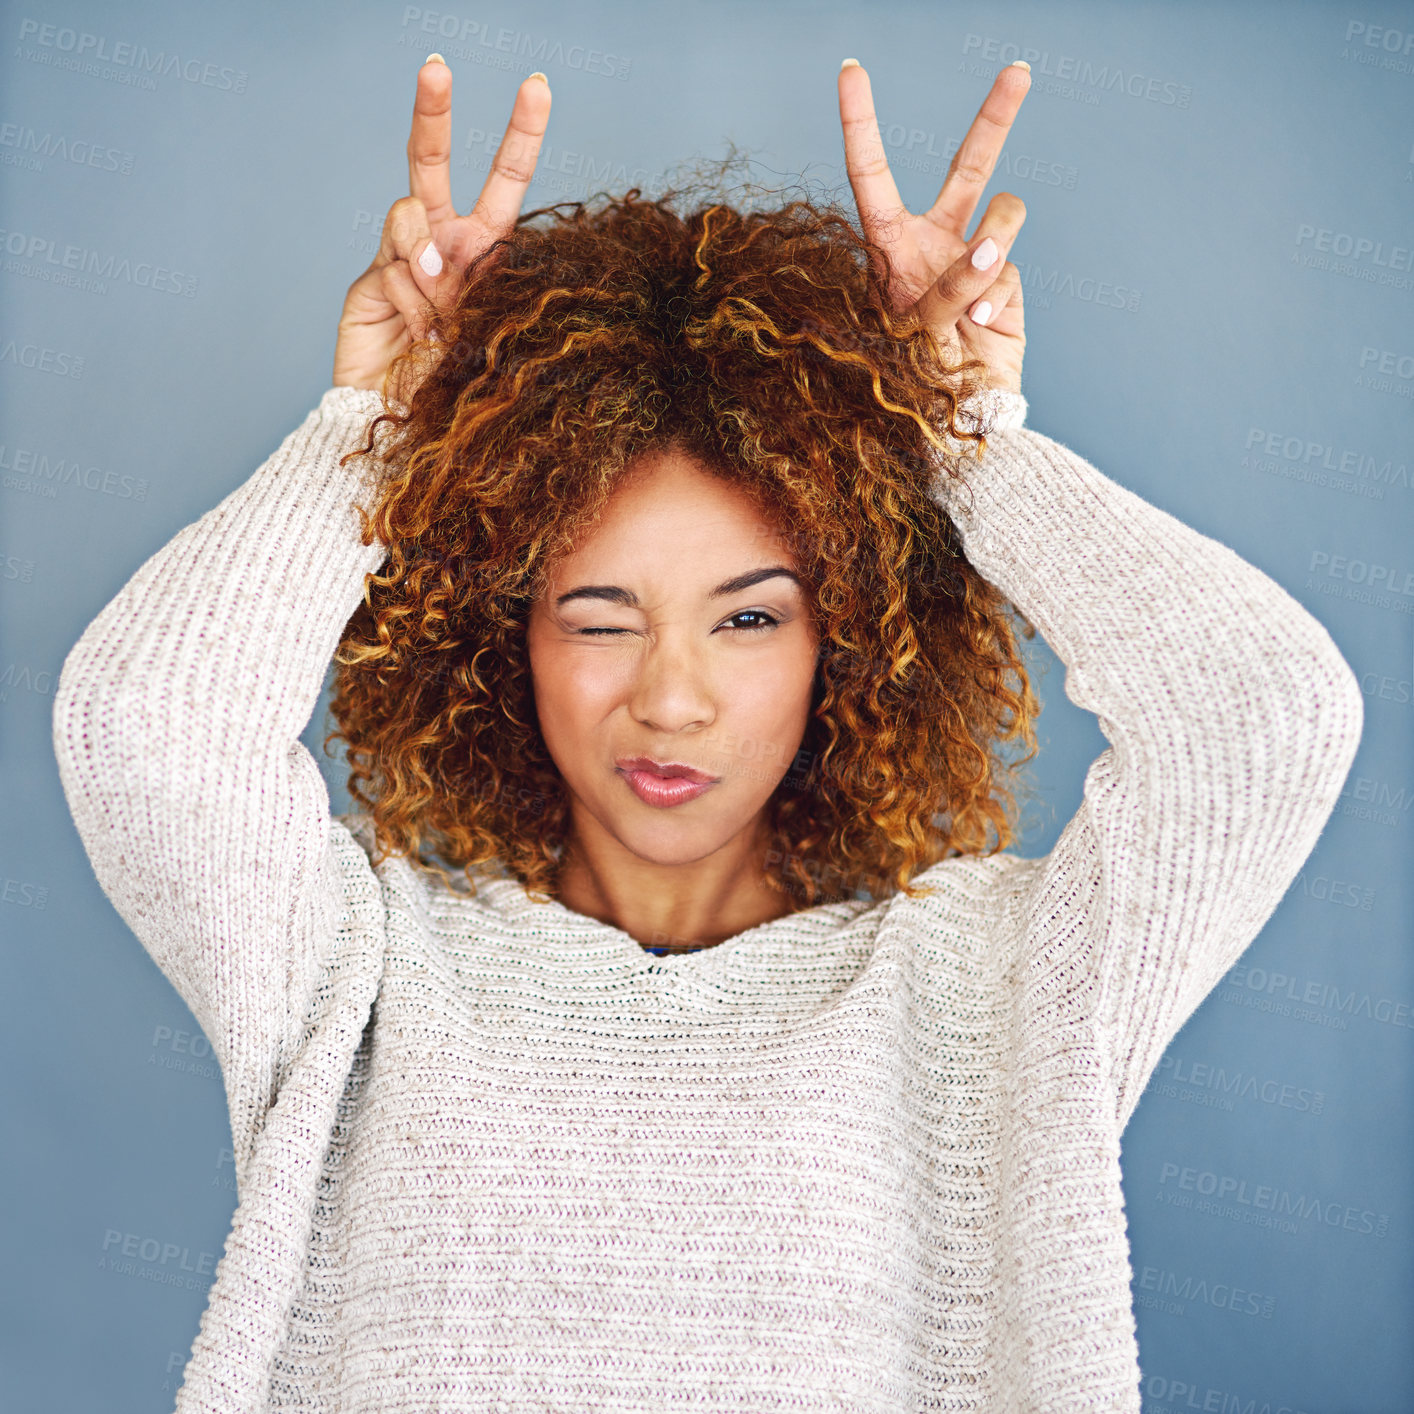 Buy stock photo Studio shot of a young woman making a bunny ear gesture against a grey background